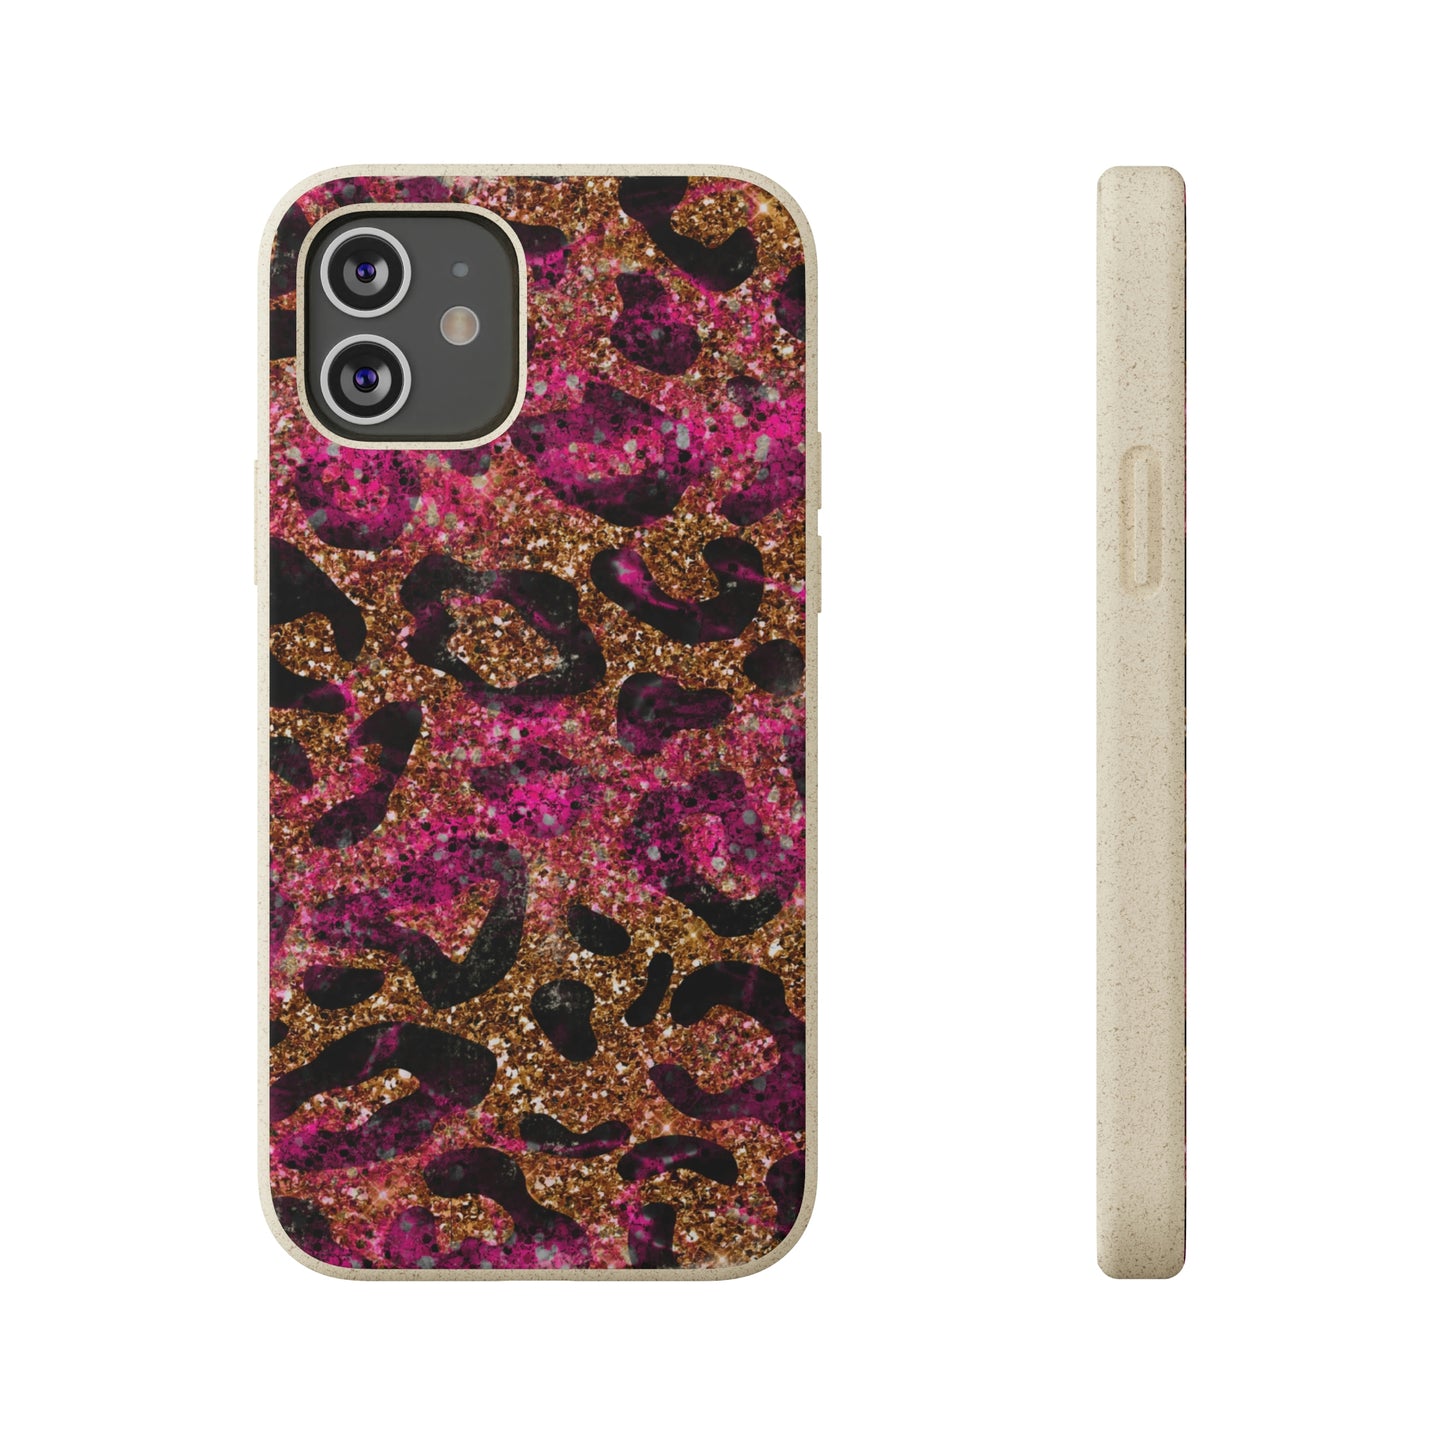 Animal Print Eco-Friendly Biodegradable Phone Case: Protect Your Device & the Planet"